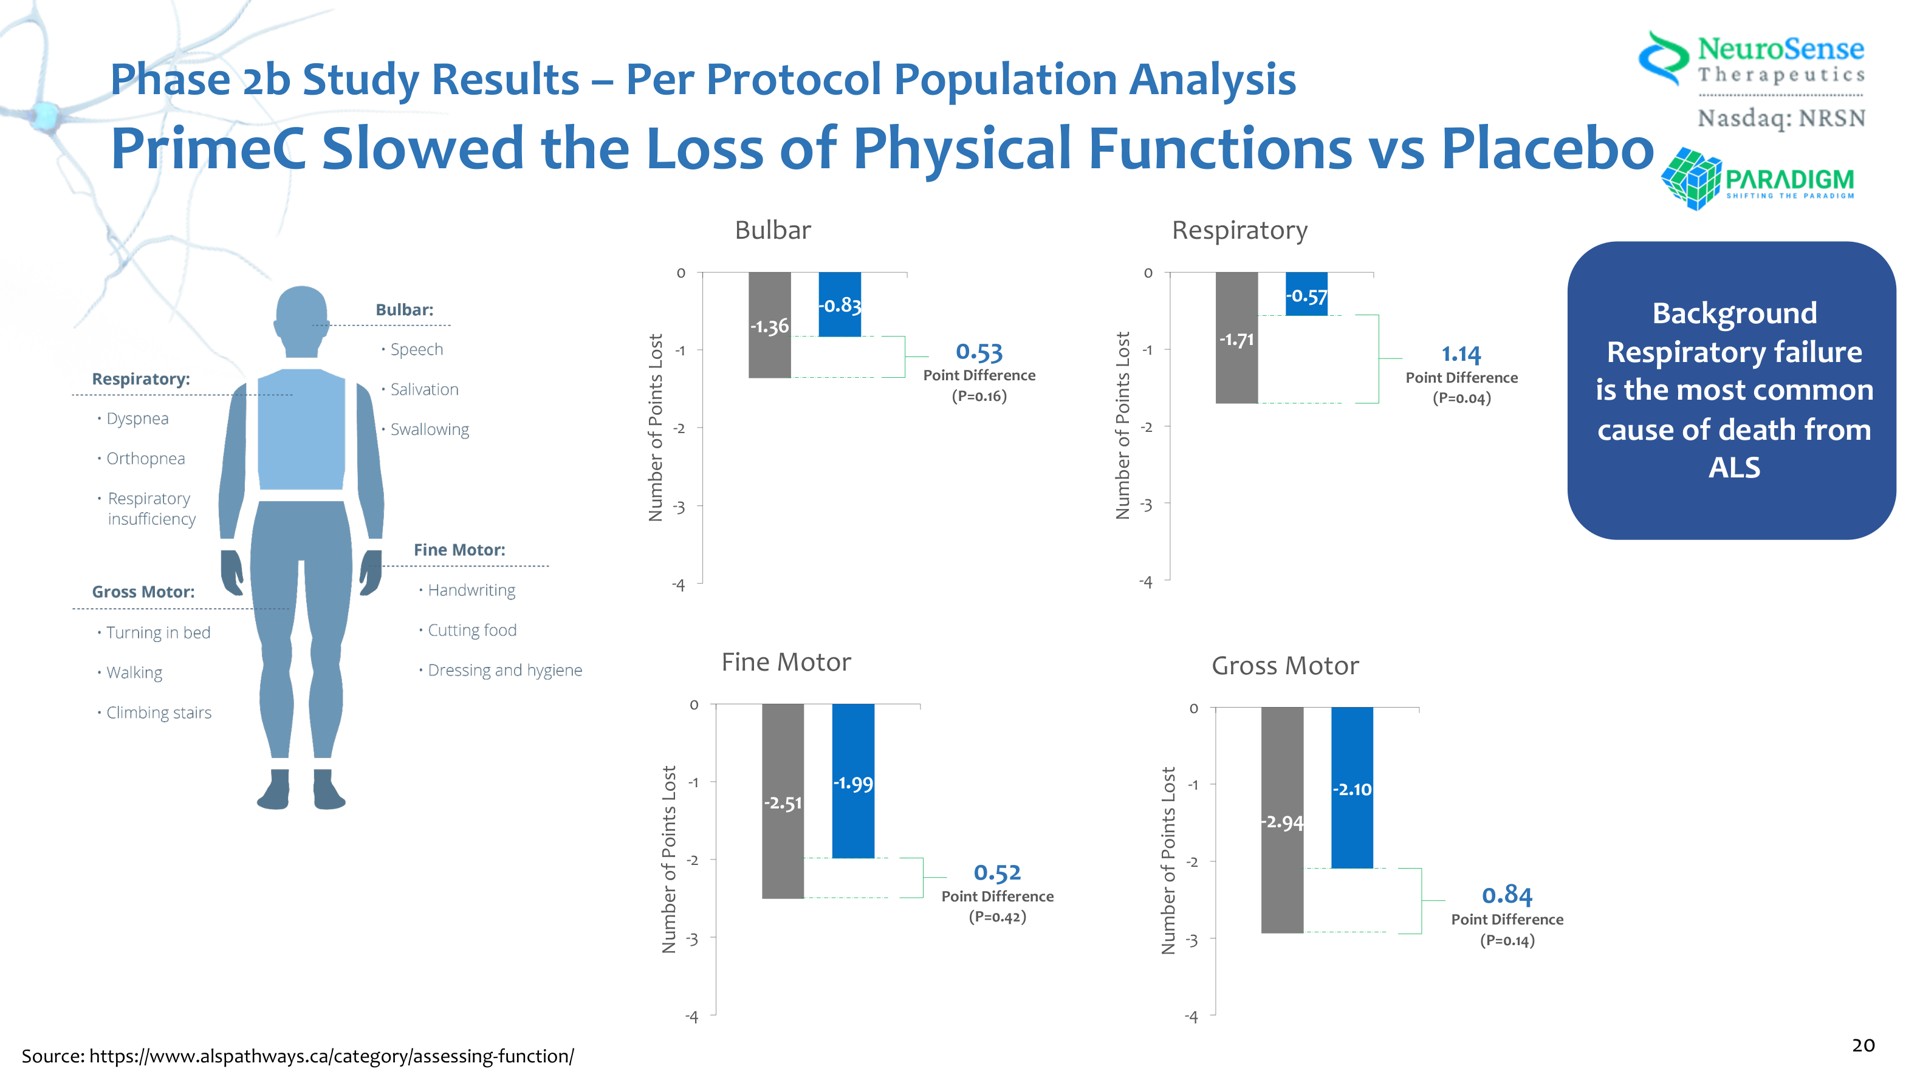 slowed the loss of physical functions placebo a | NeuroSense Therapeutics